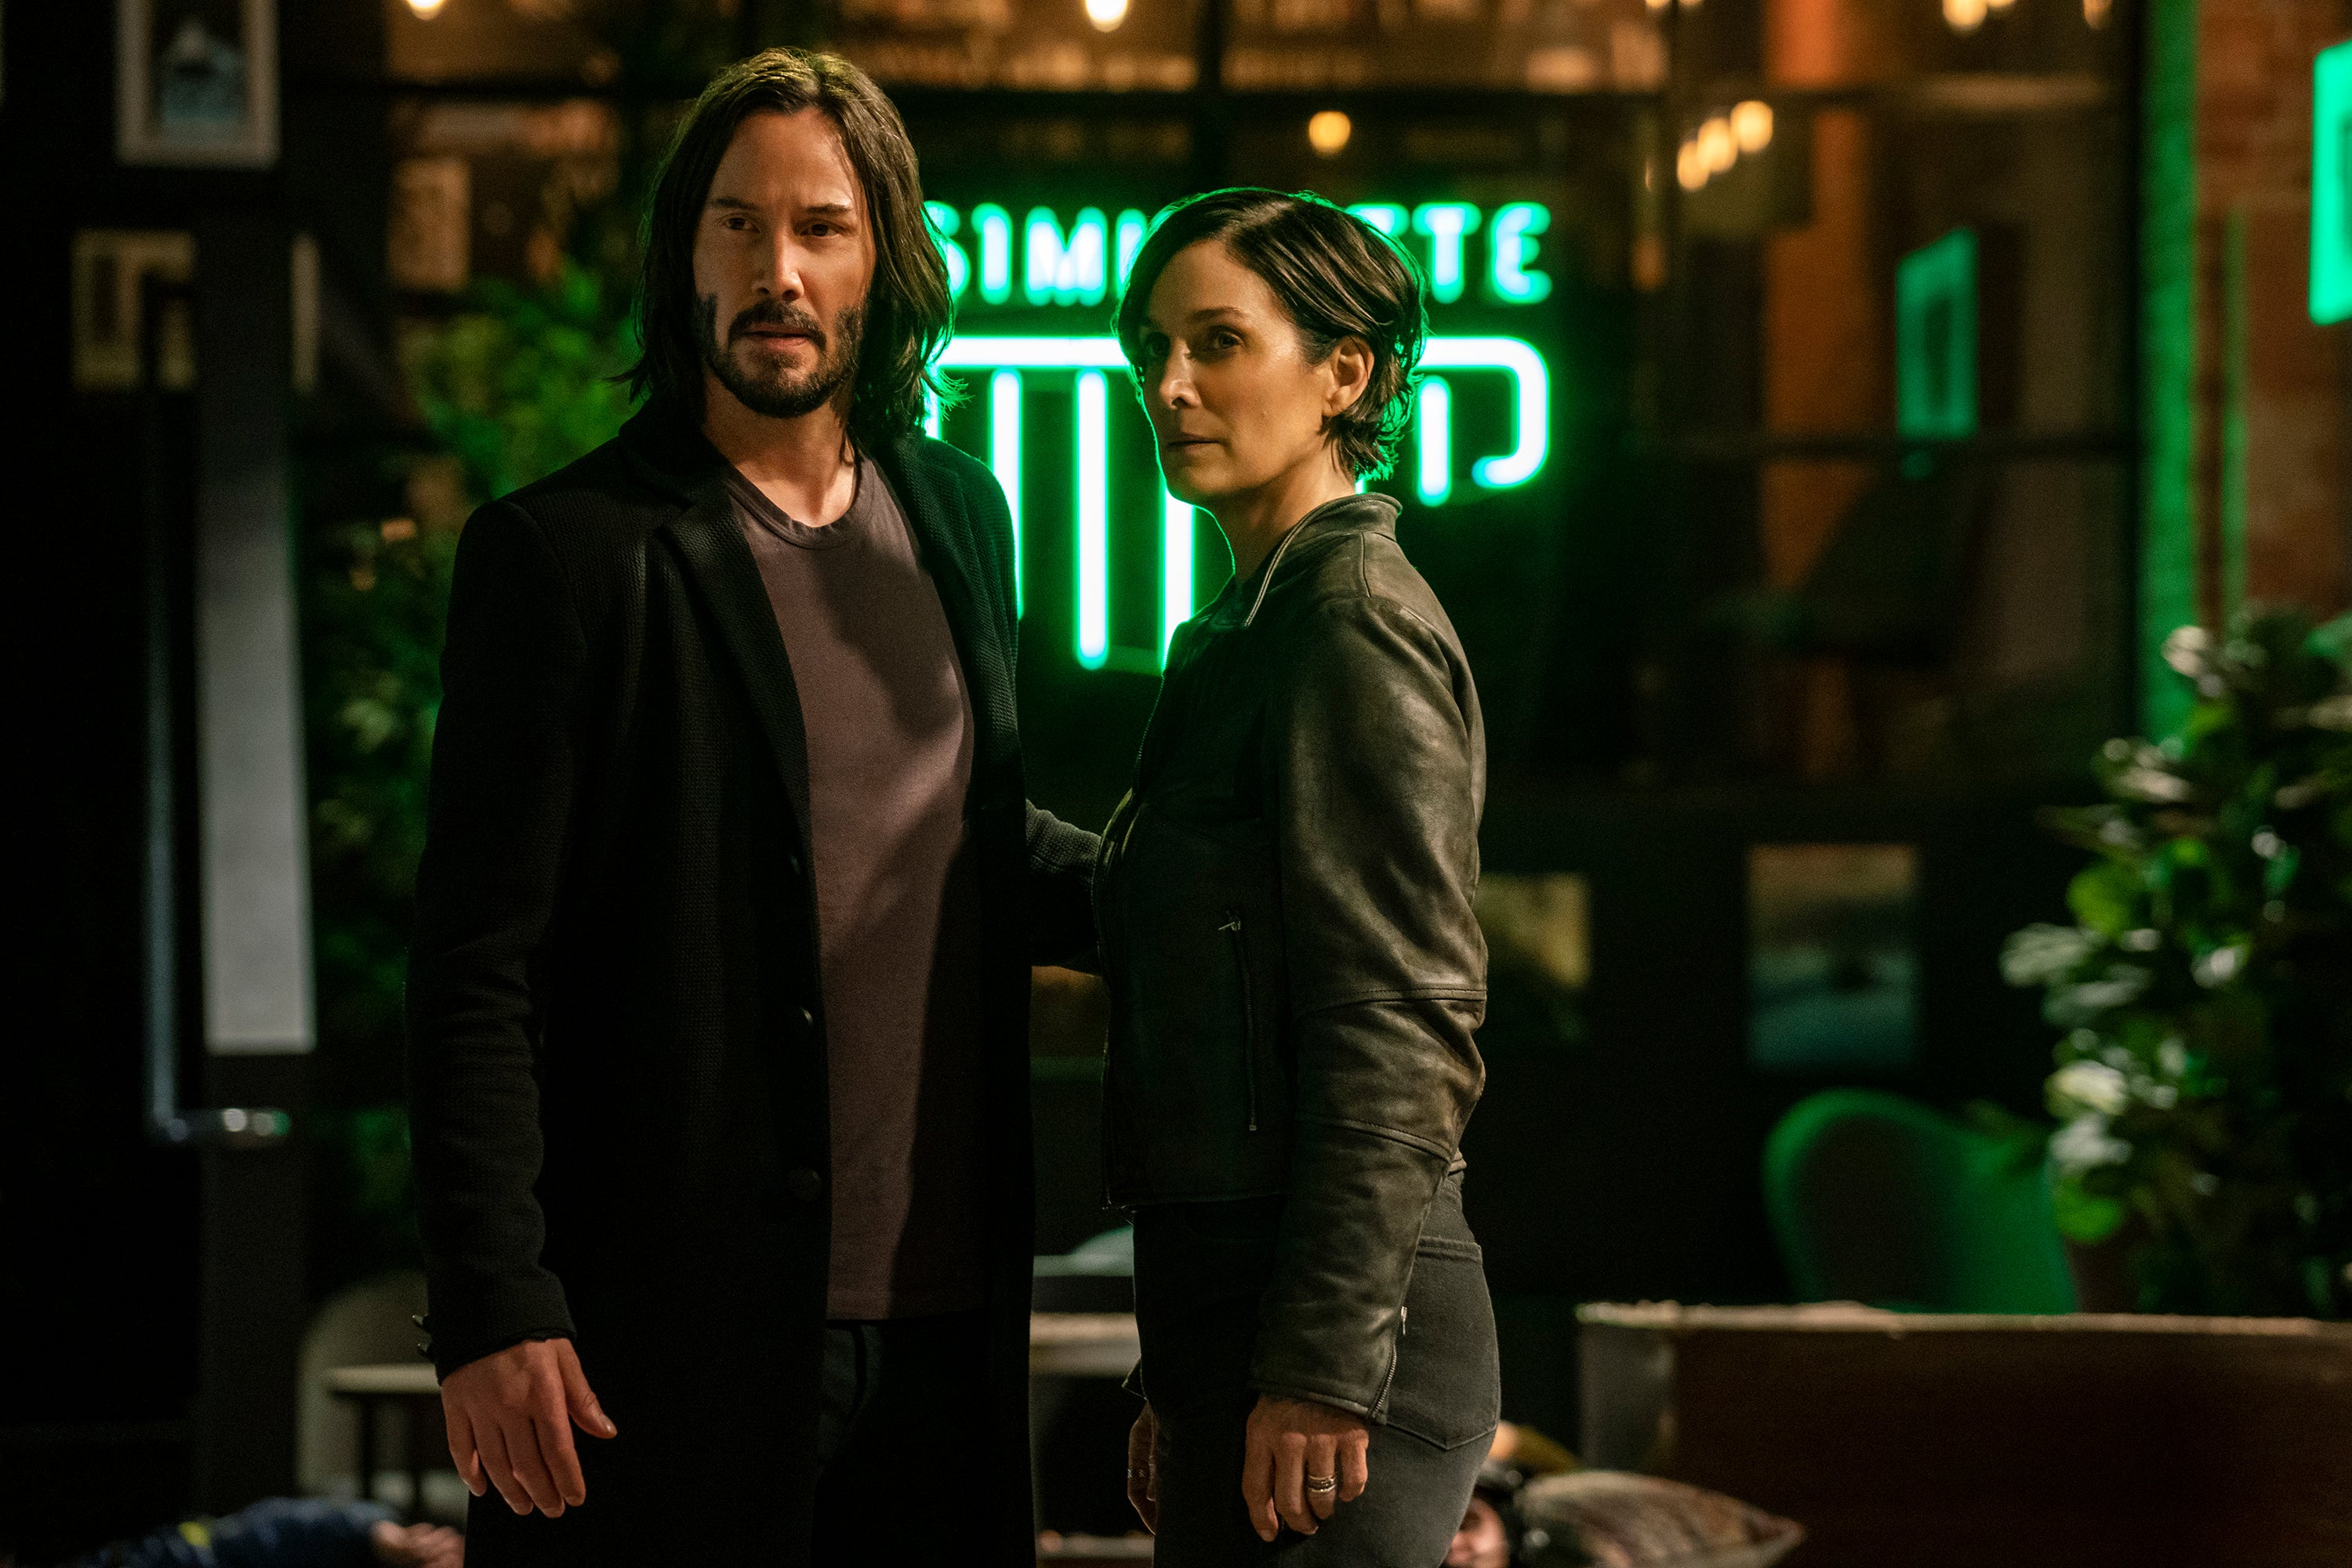 Keanu Reeves and Carrie Anne Moss in The Matrix Resurrections